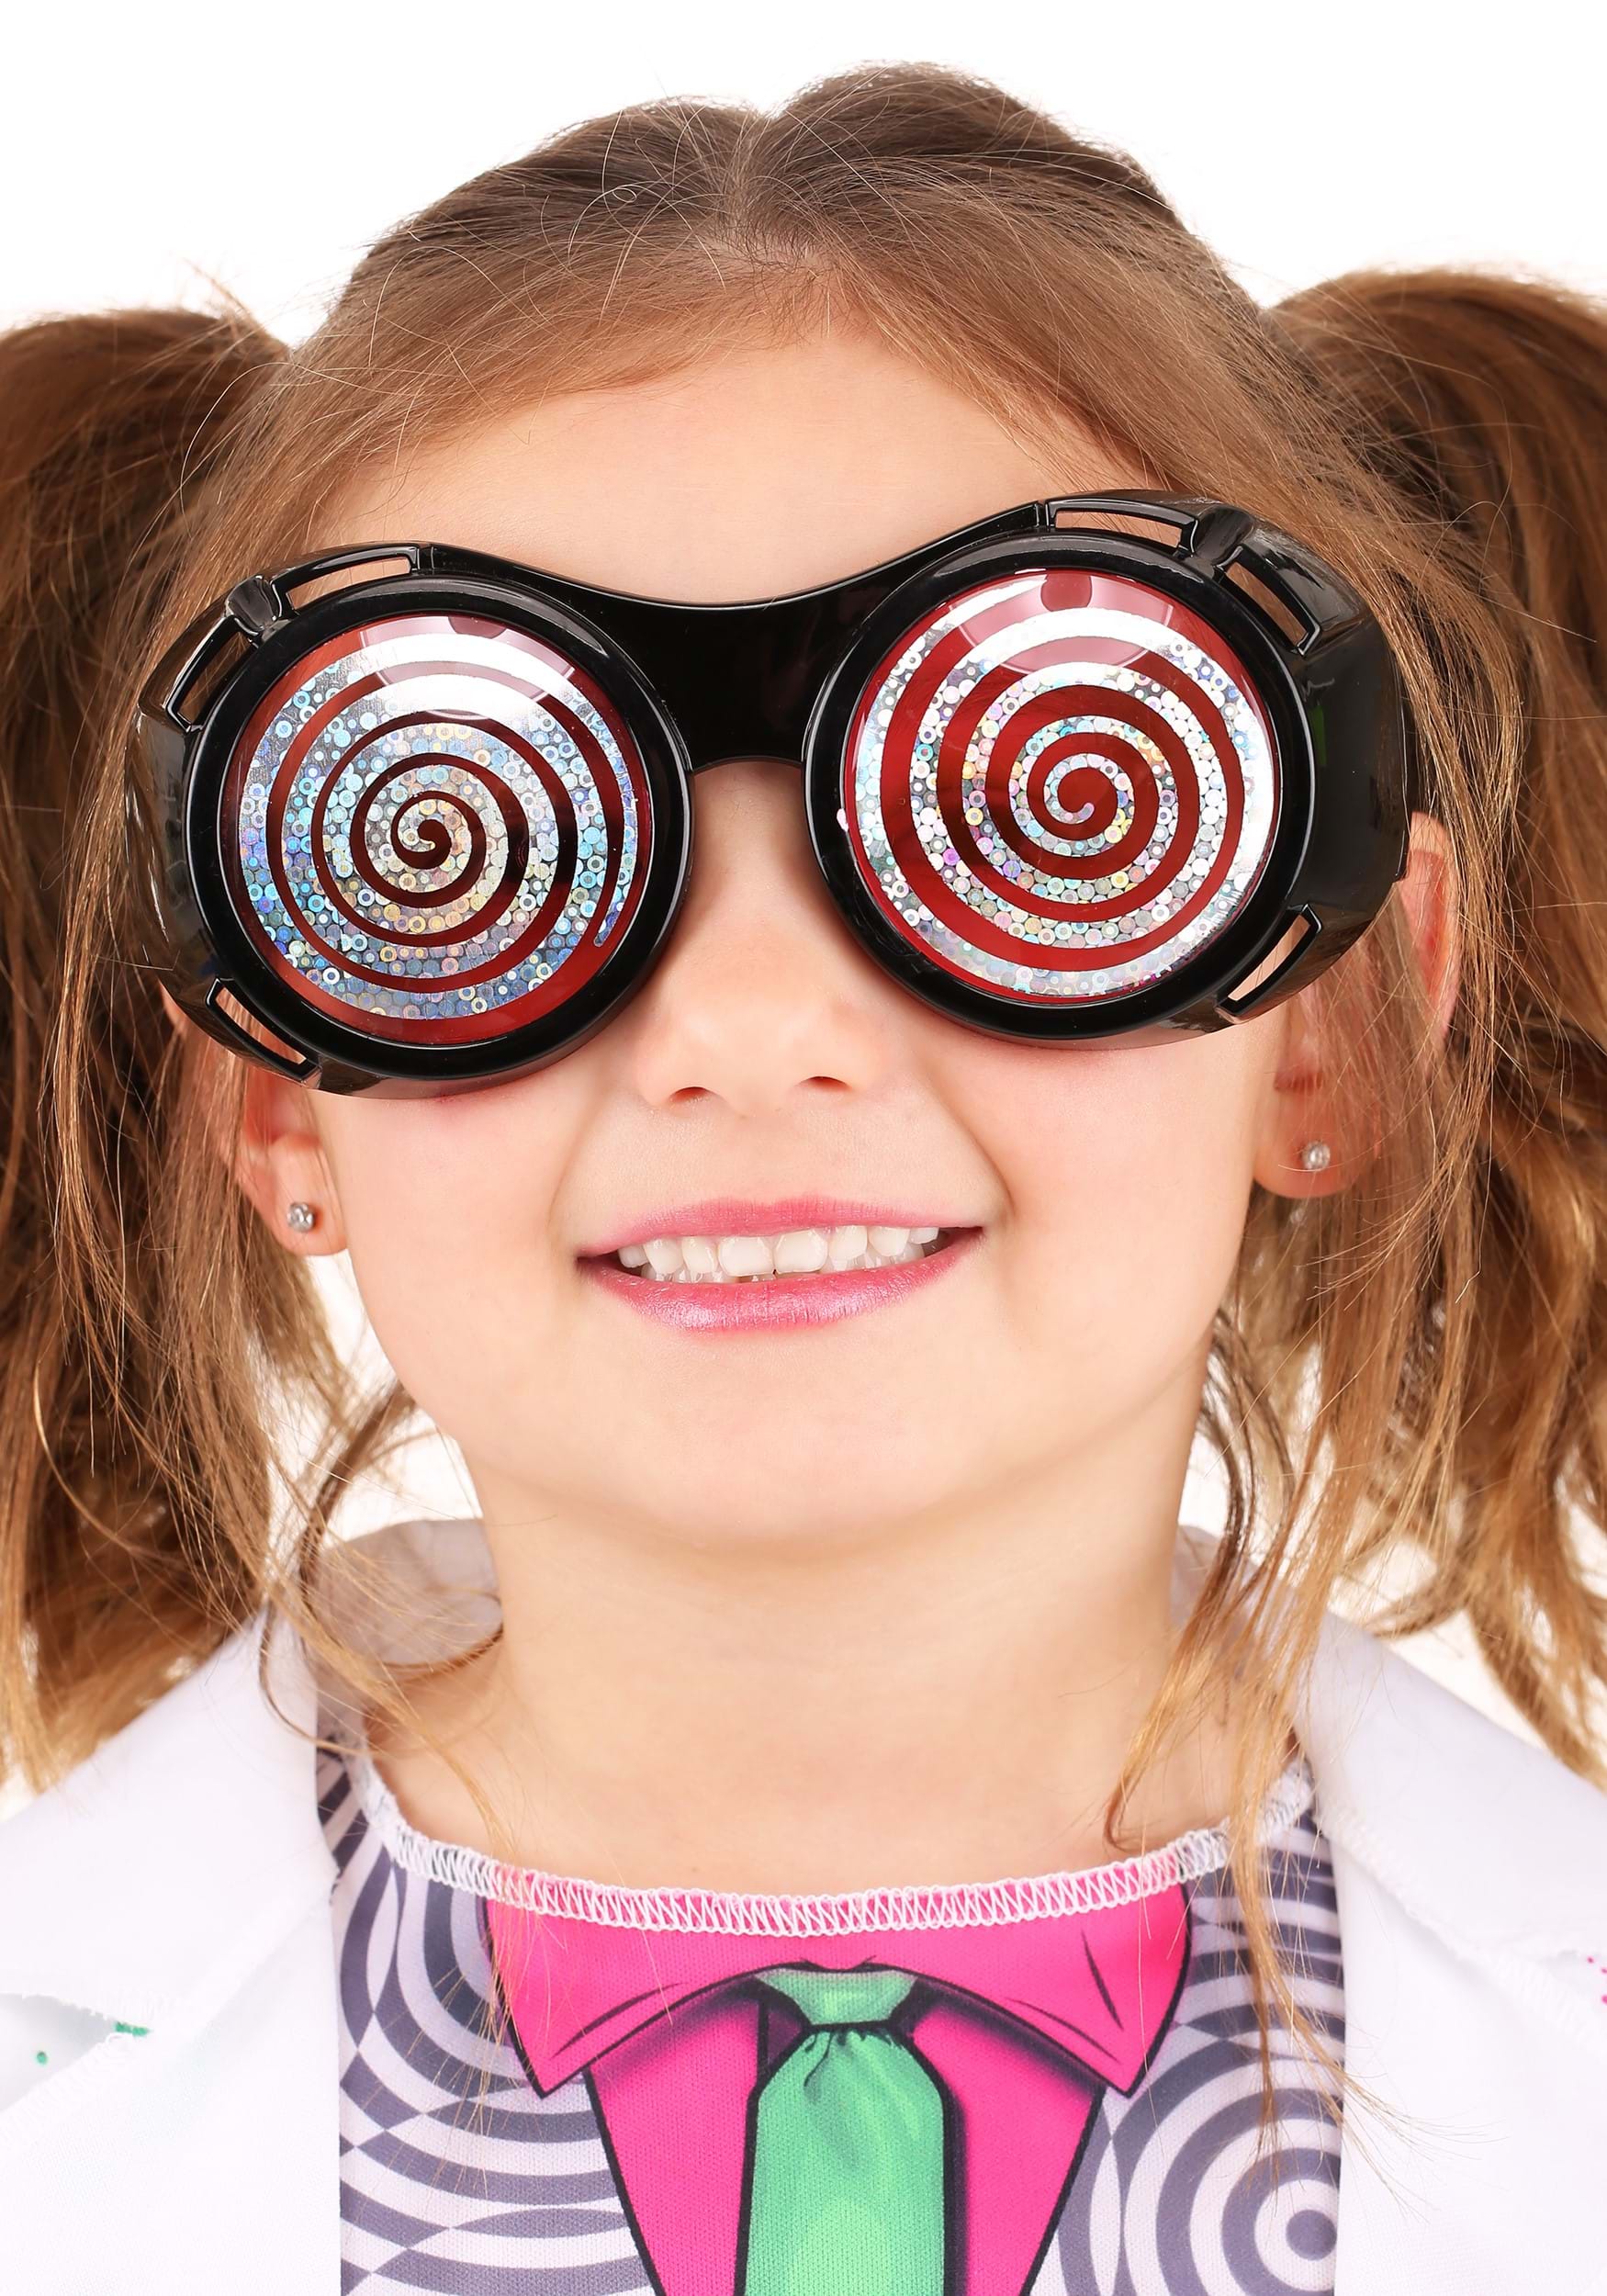 Mad Scientist Costume For Toddlers